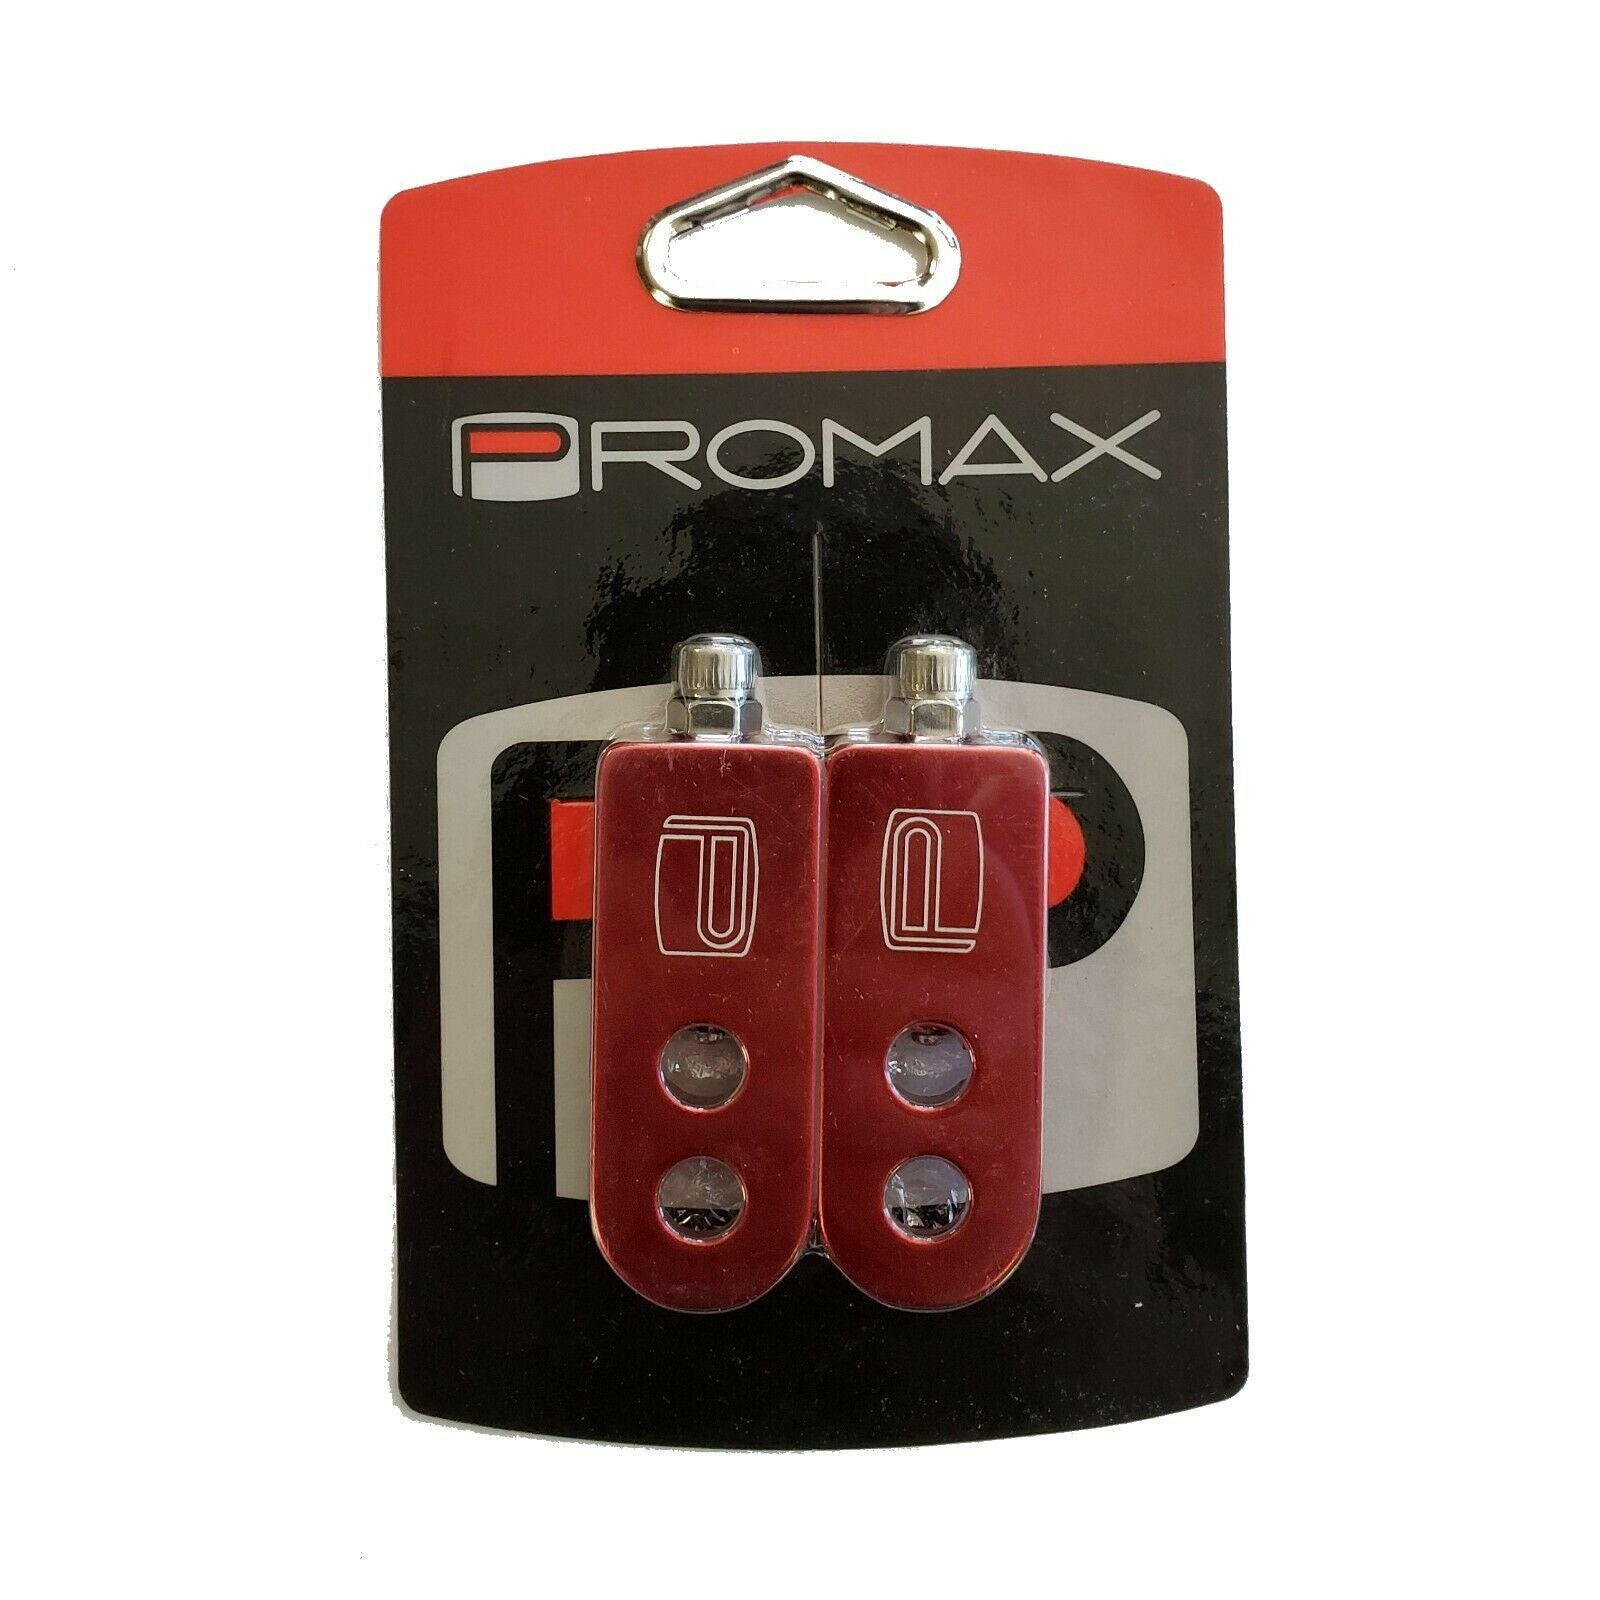 Promax C-1 BMX Chain Tensioners - 3/8" - Pair - Red